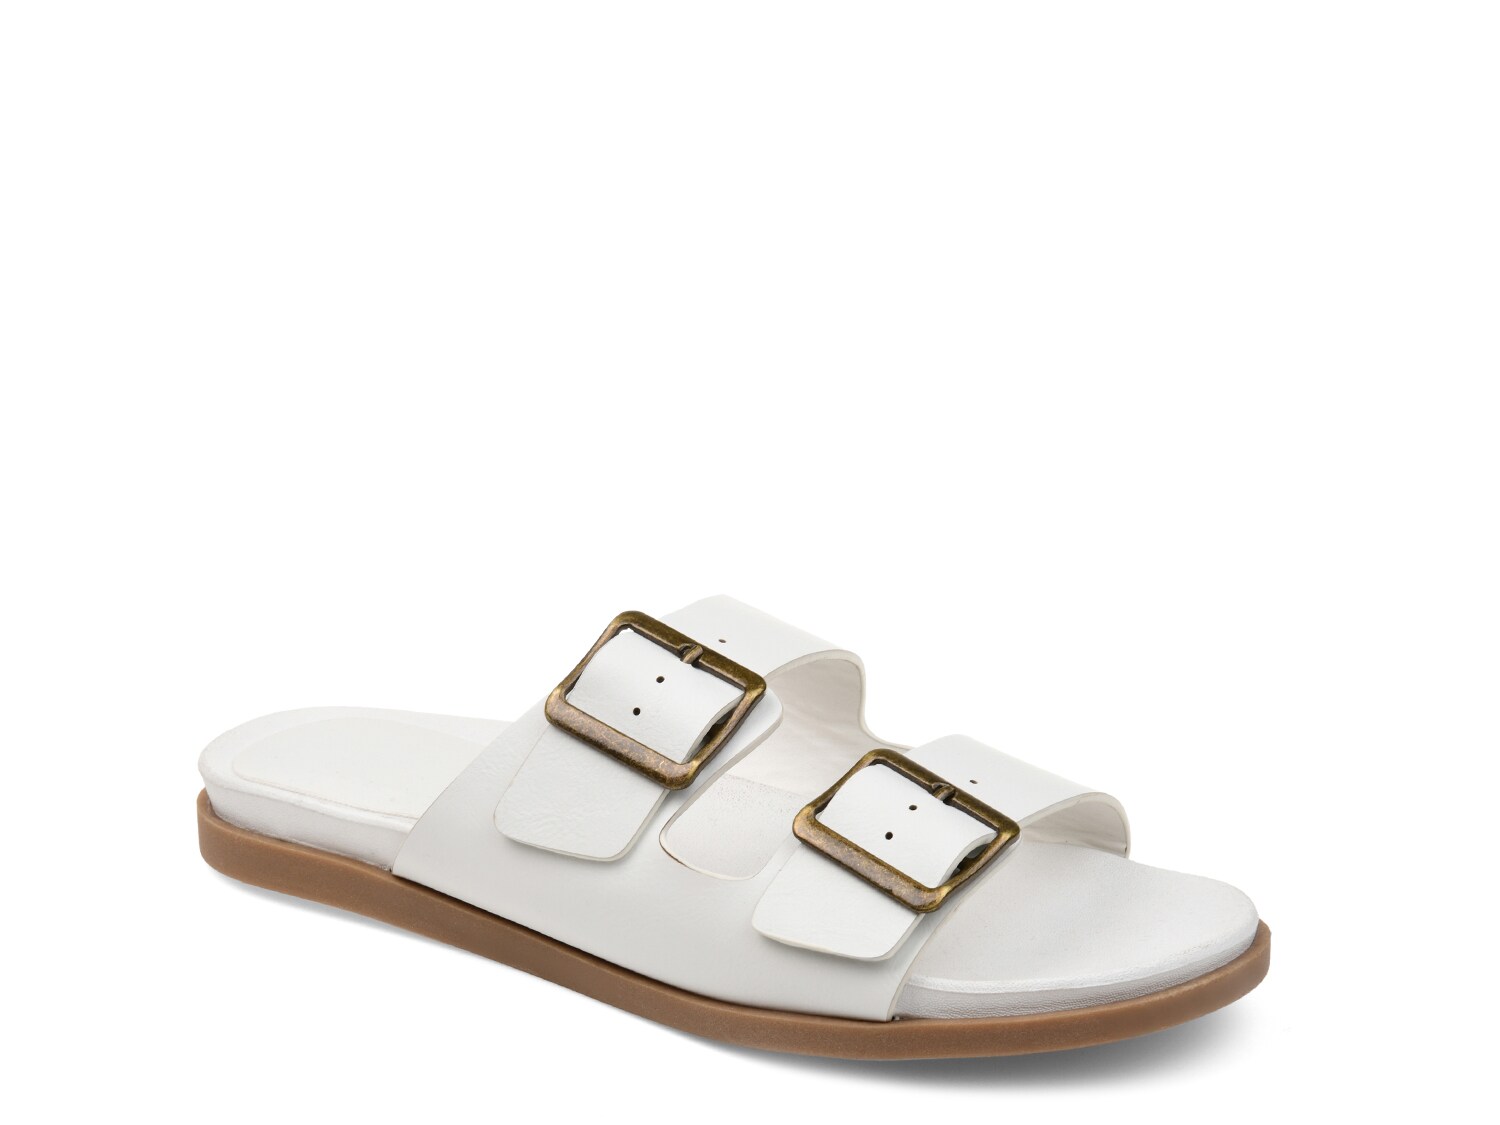 Journee Collection Whitley Sandal - Free Shipping | DSW